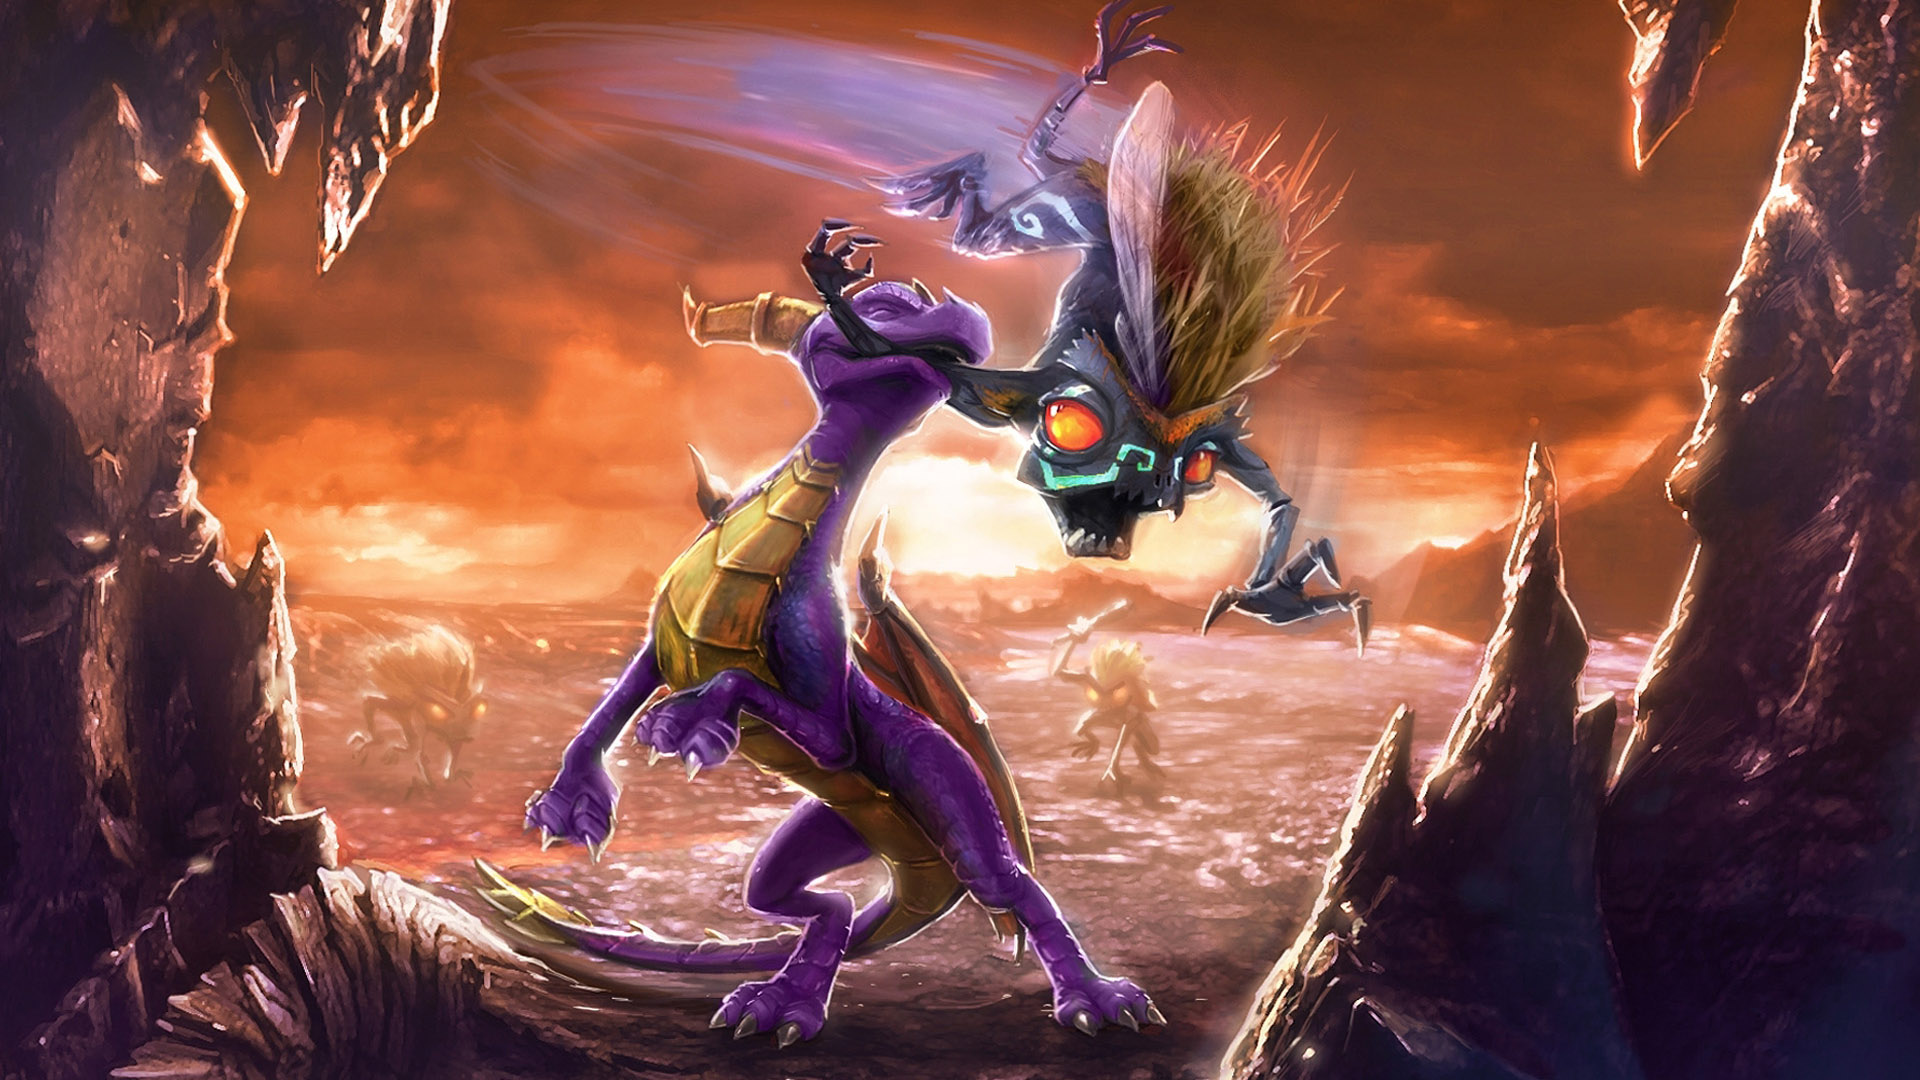 Video Game The Legend of Spyro: Dawn of the Dragon HD Wallpaper | Background Image